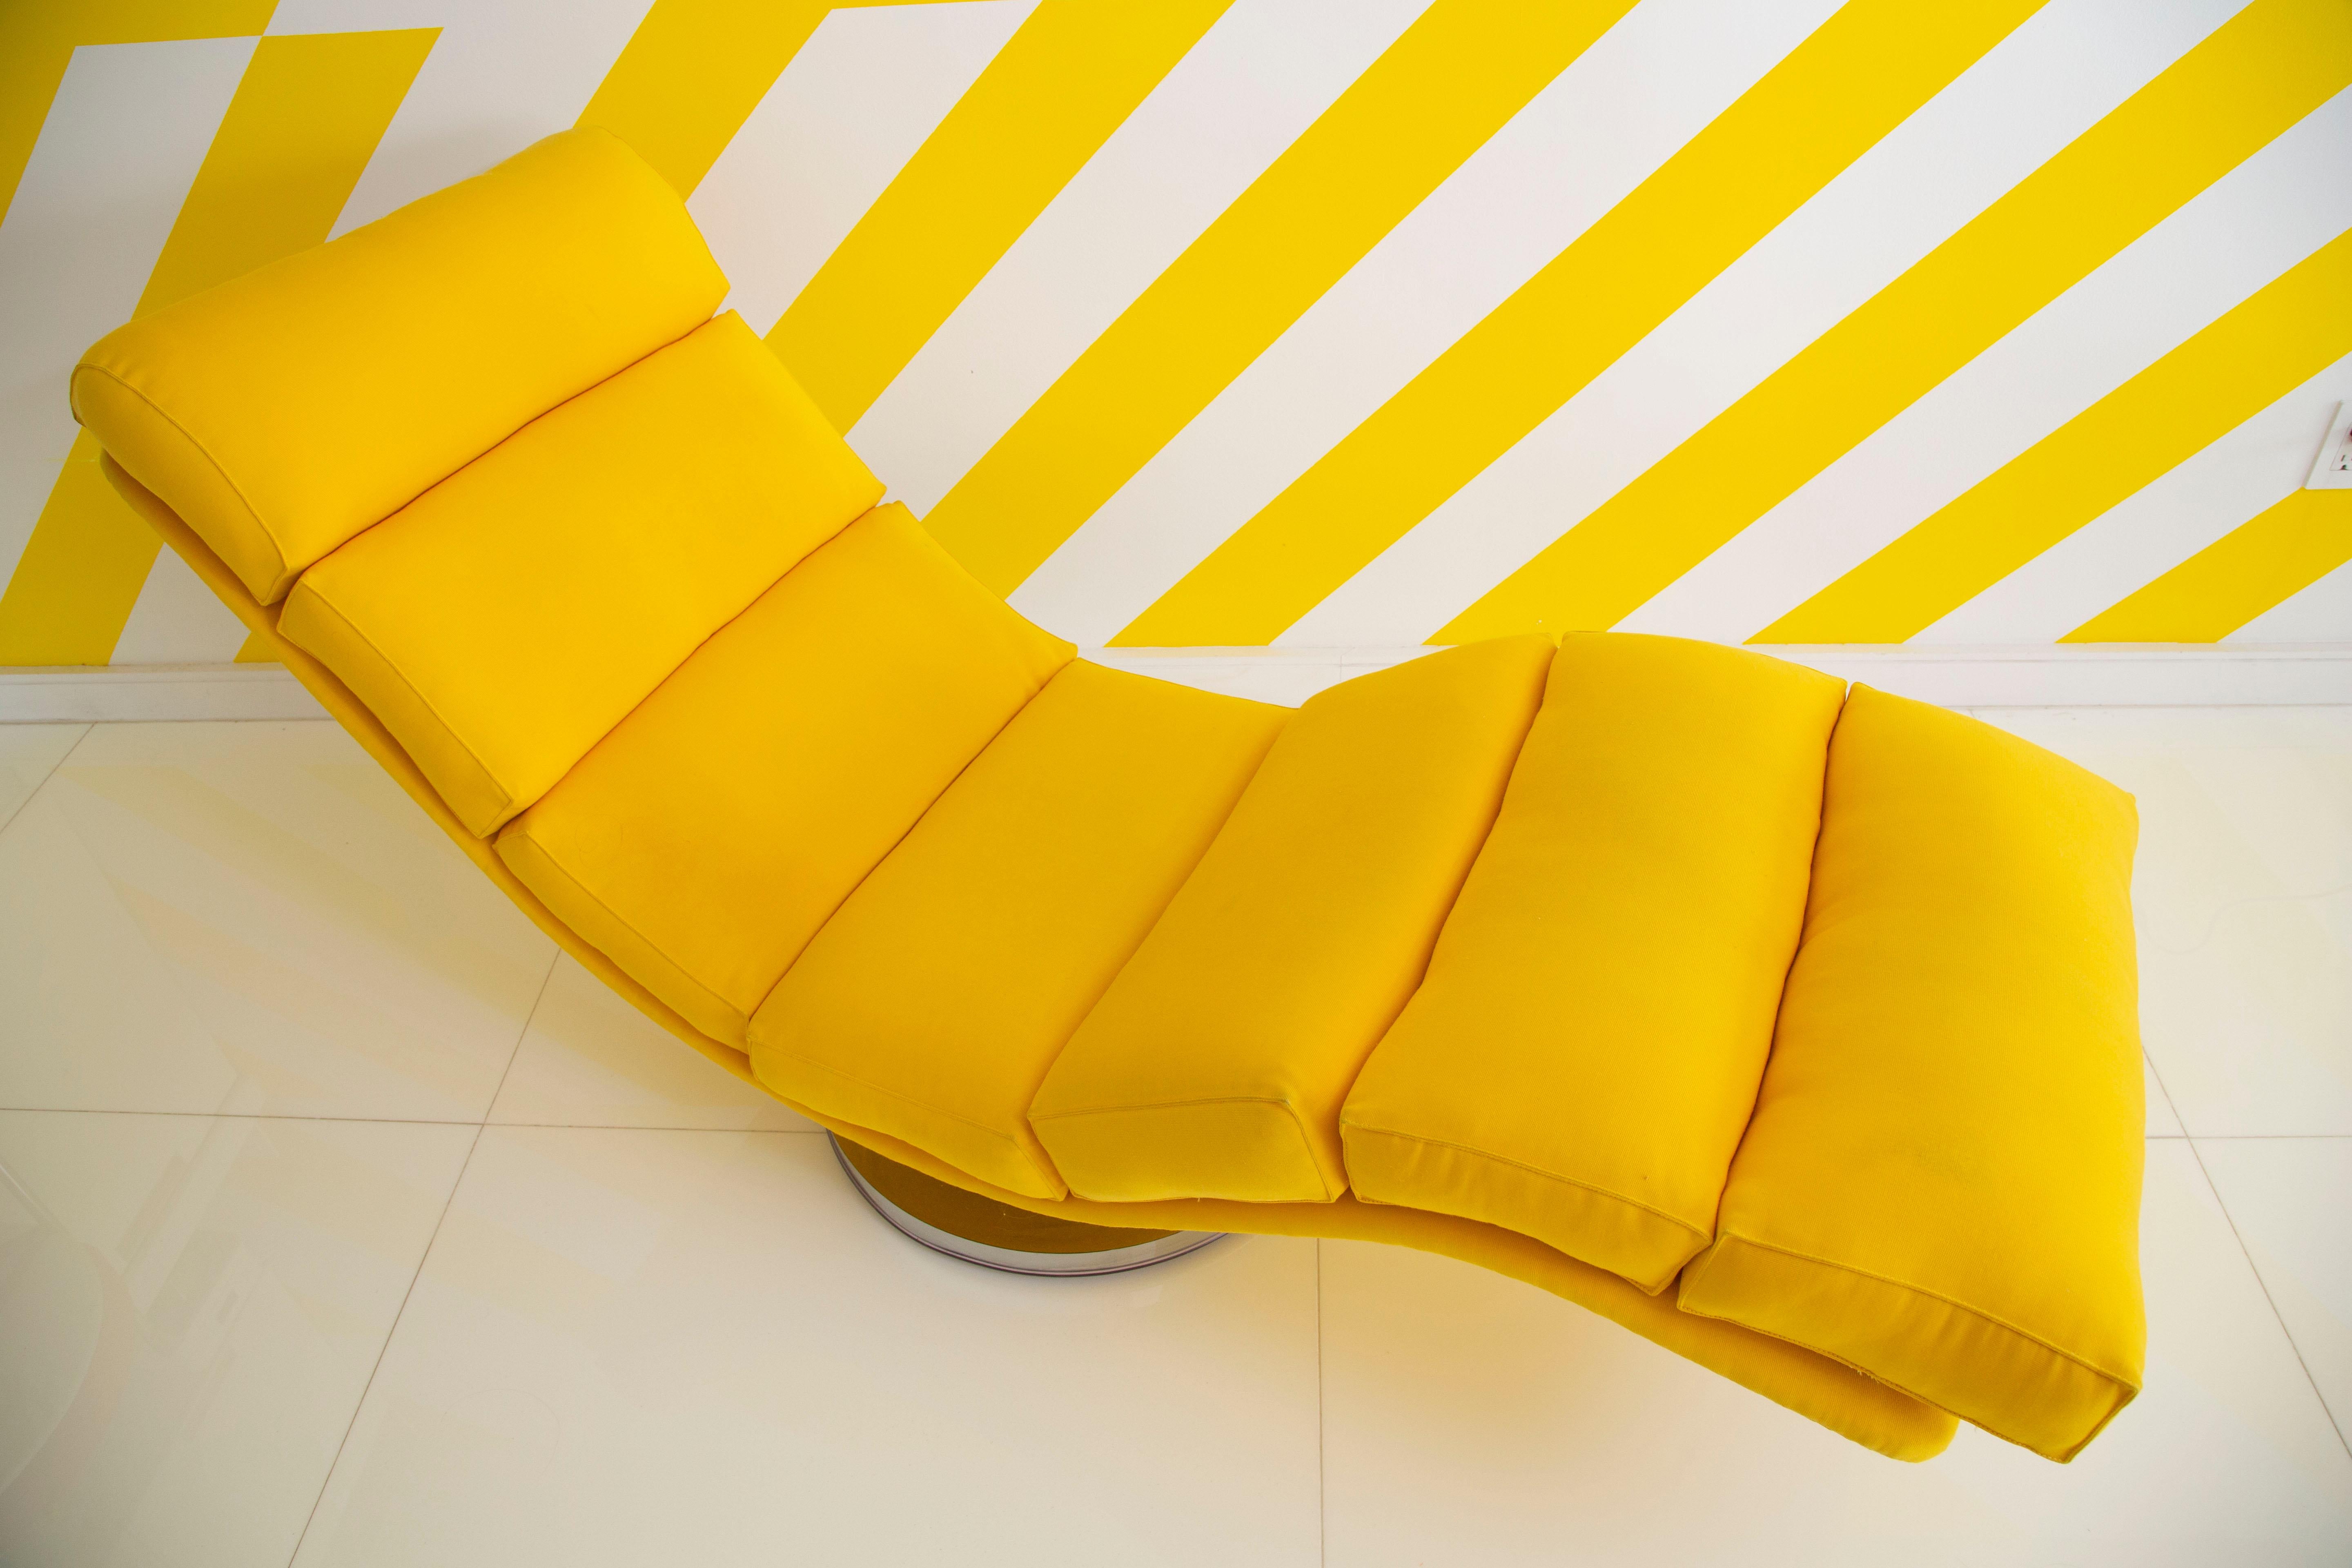 Milo Baughman designed chaise lounge. Manufactured by Thayer Coggin.